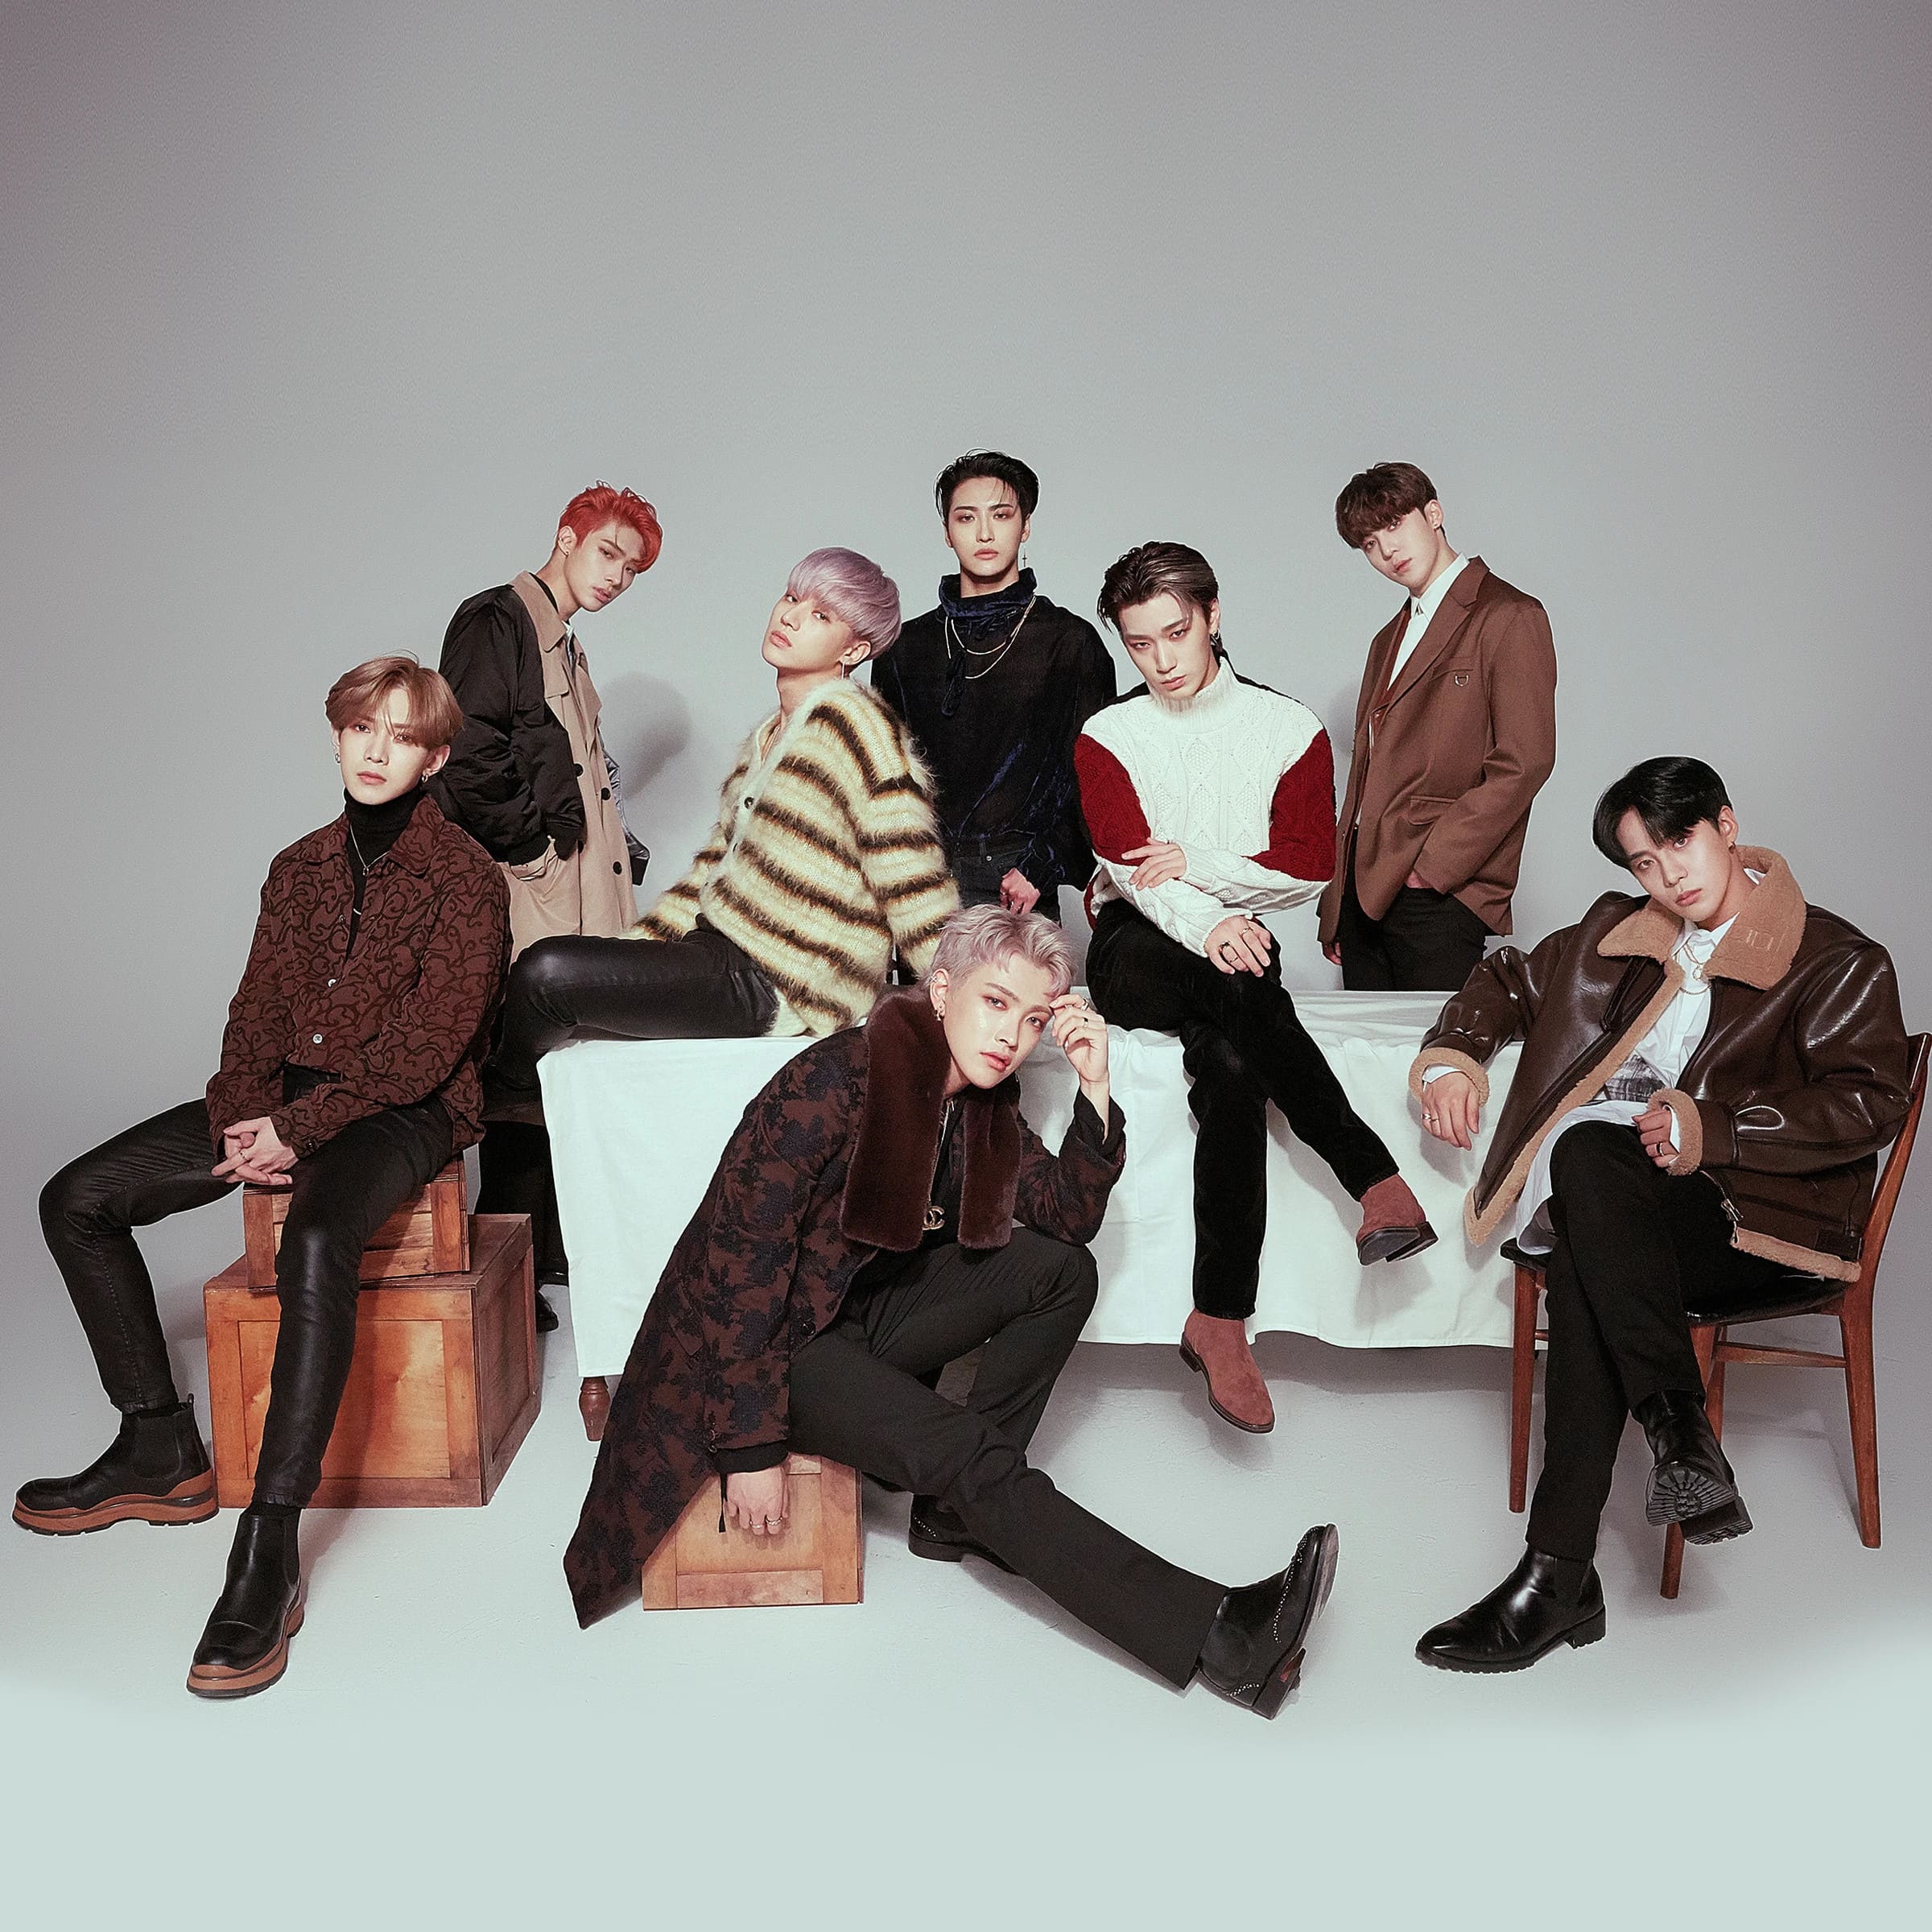 ATEEZ-TREASURE-EPILOGUE-Action-to-Answer-Concept-Teaser-Images-documents-1.jpeg__PID:48cd56bc-1500-4c74-9ba1-fb233ceb56fb